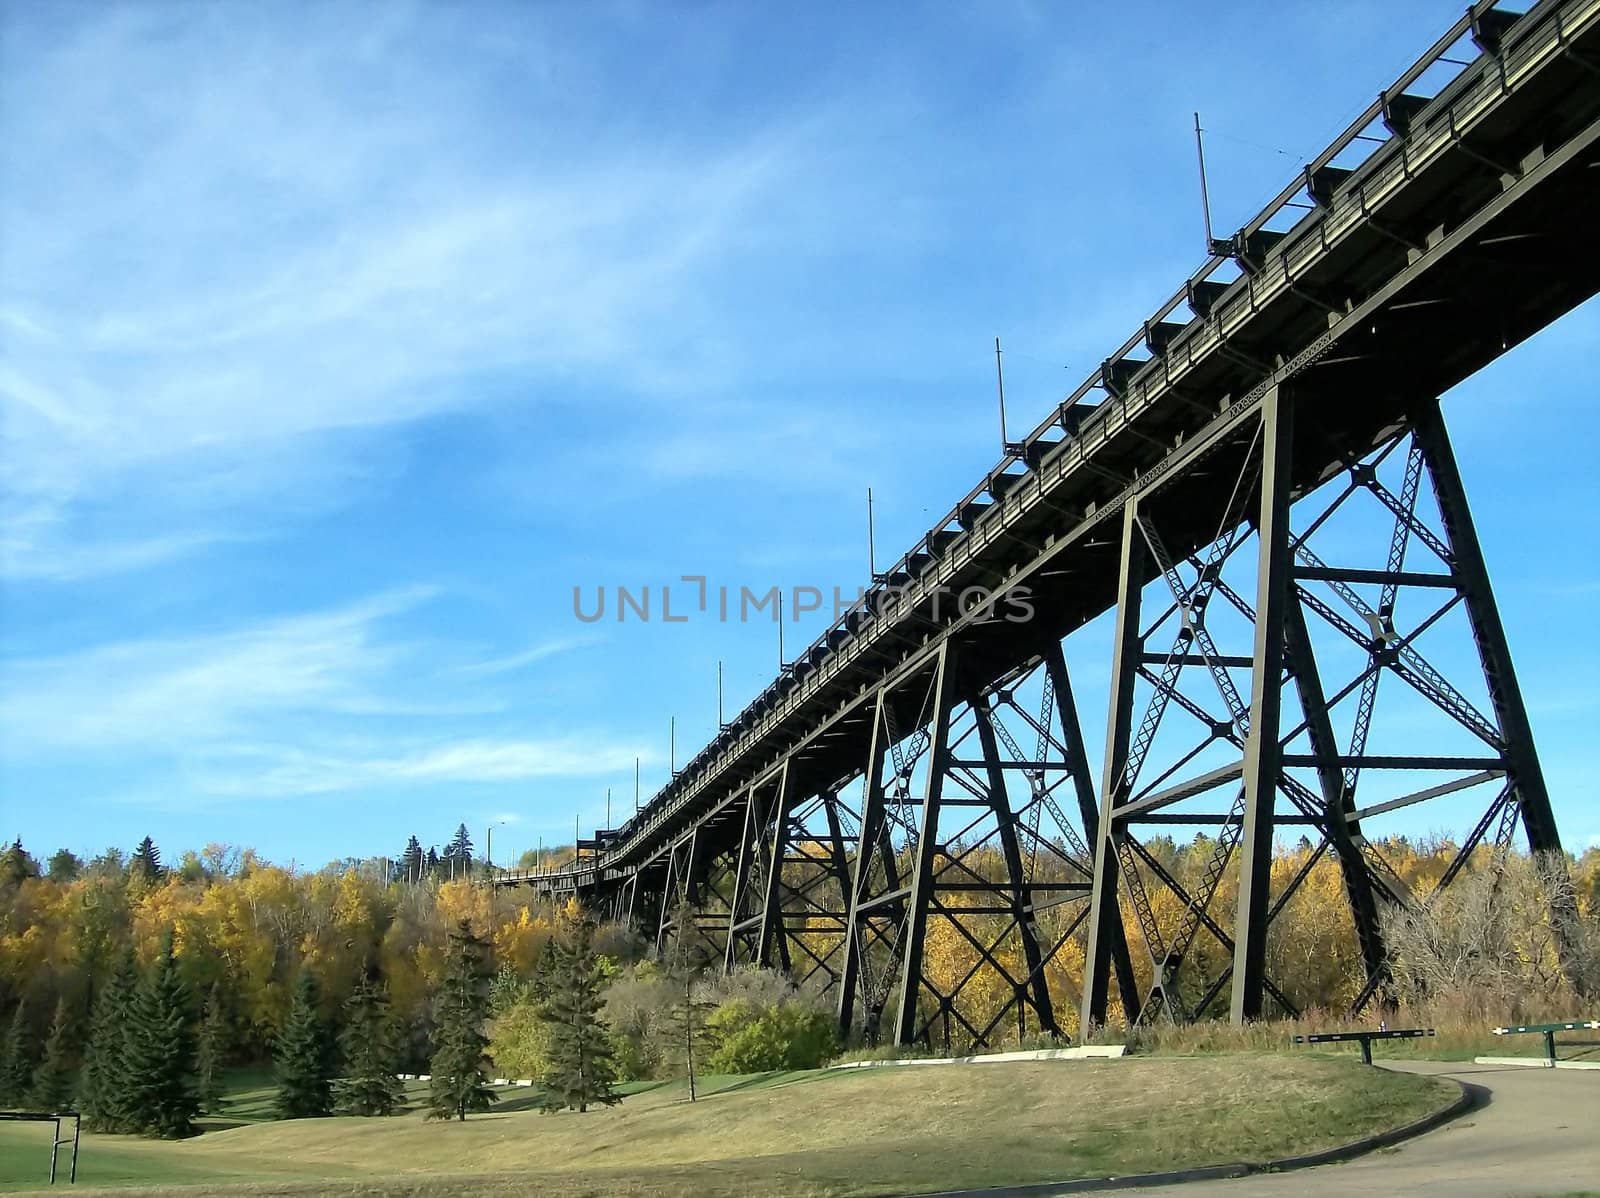 Historic train bridge spanning the distance over a park in early autumn.